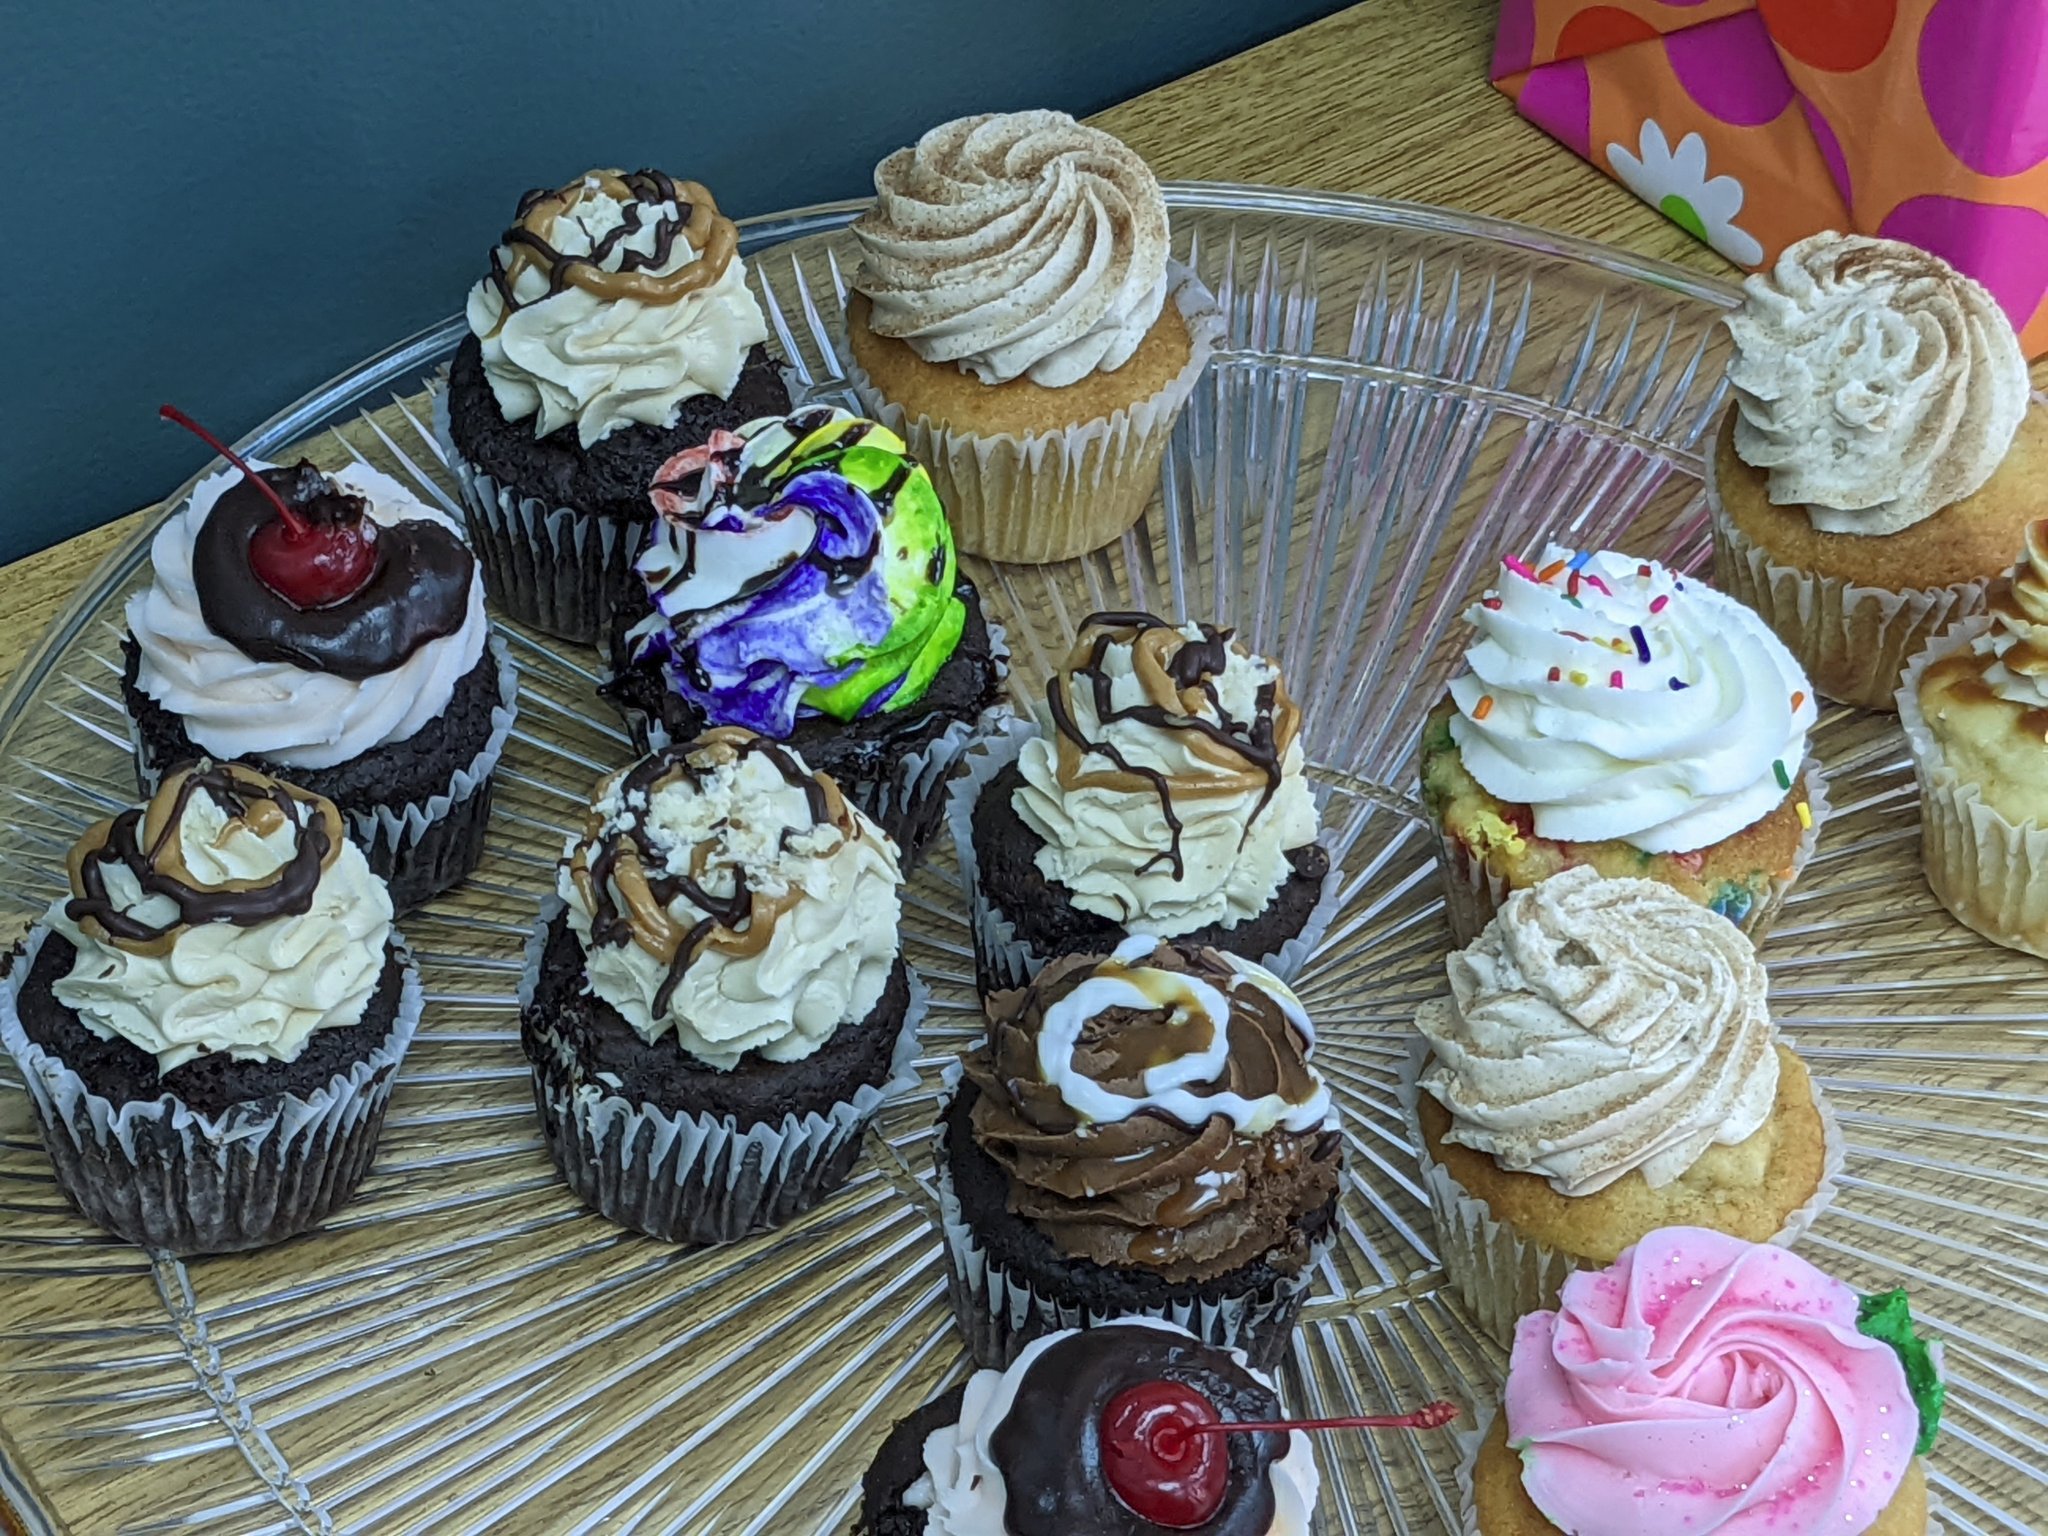 Cupcakes donated by Cupcakes and Kisses.jpg